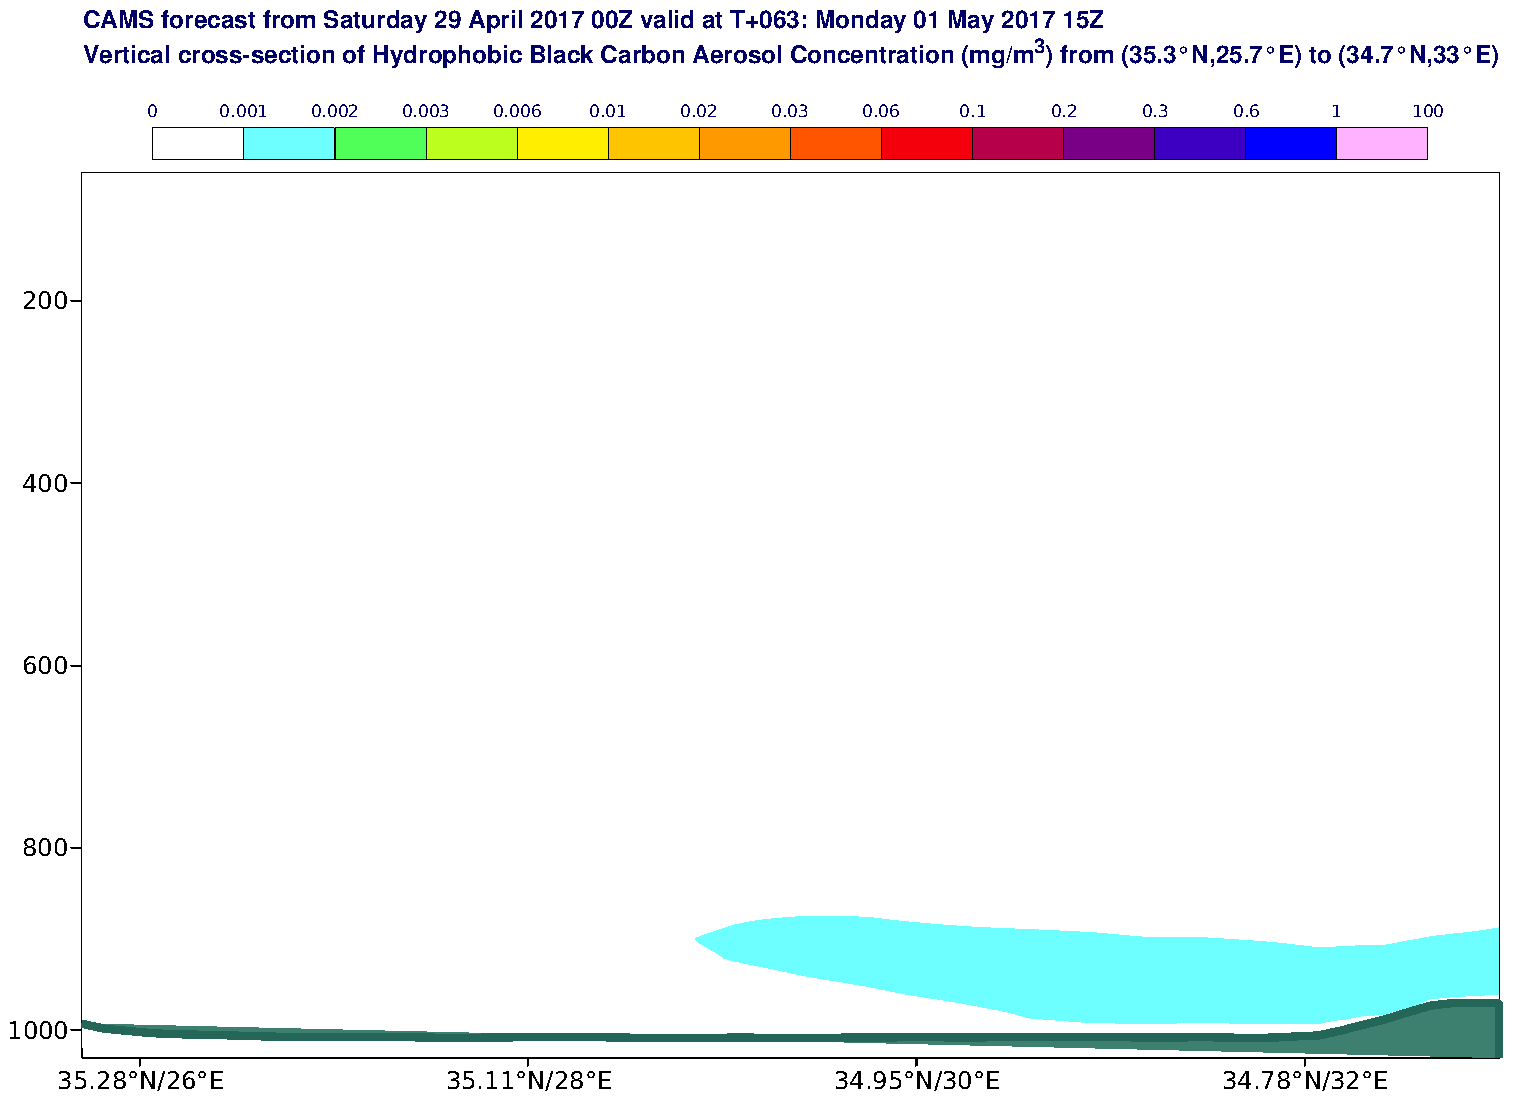 Vertical cross-section of Hydrophobic Black Carbon Aerosol Concentration (mg/m3) valid at T63 - 2017-05-01 15:00